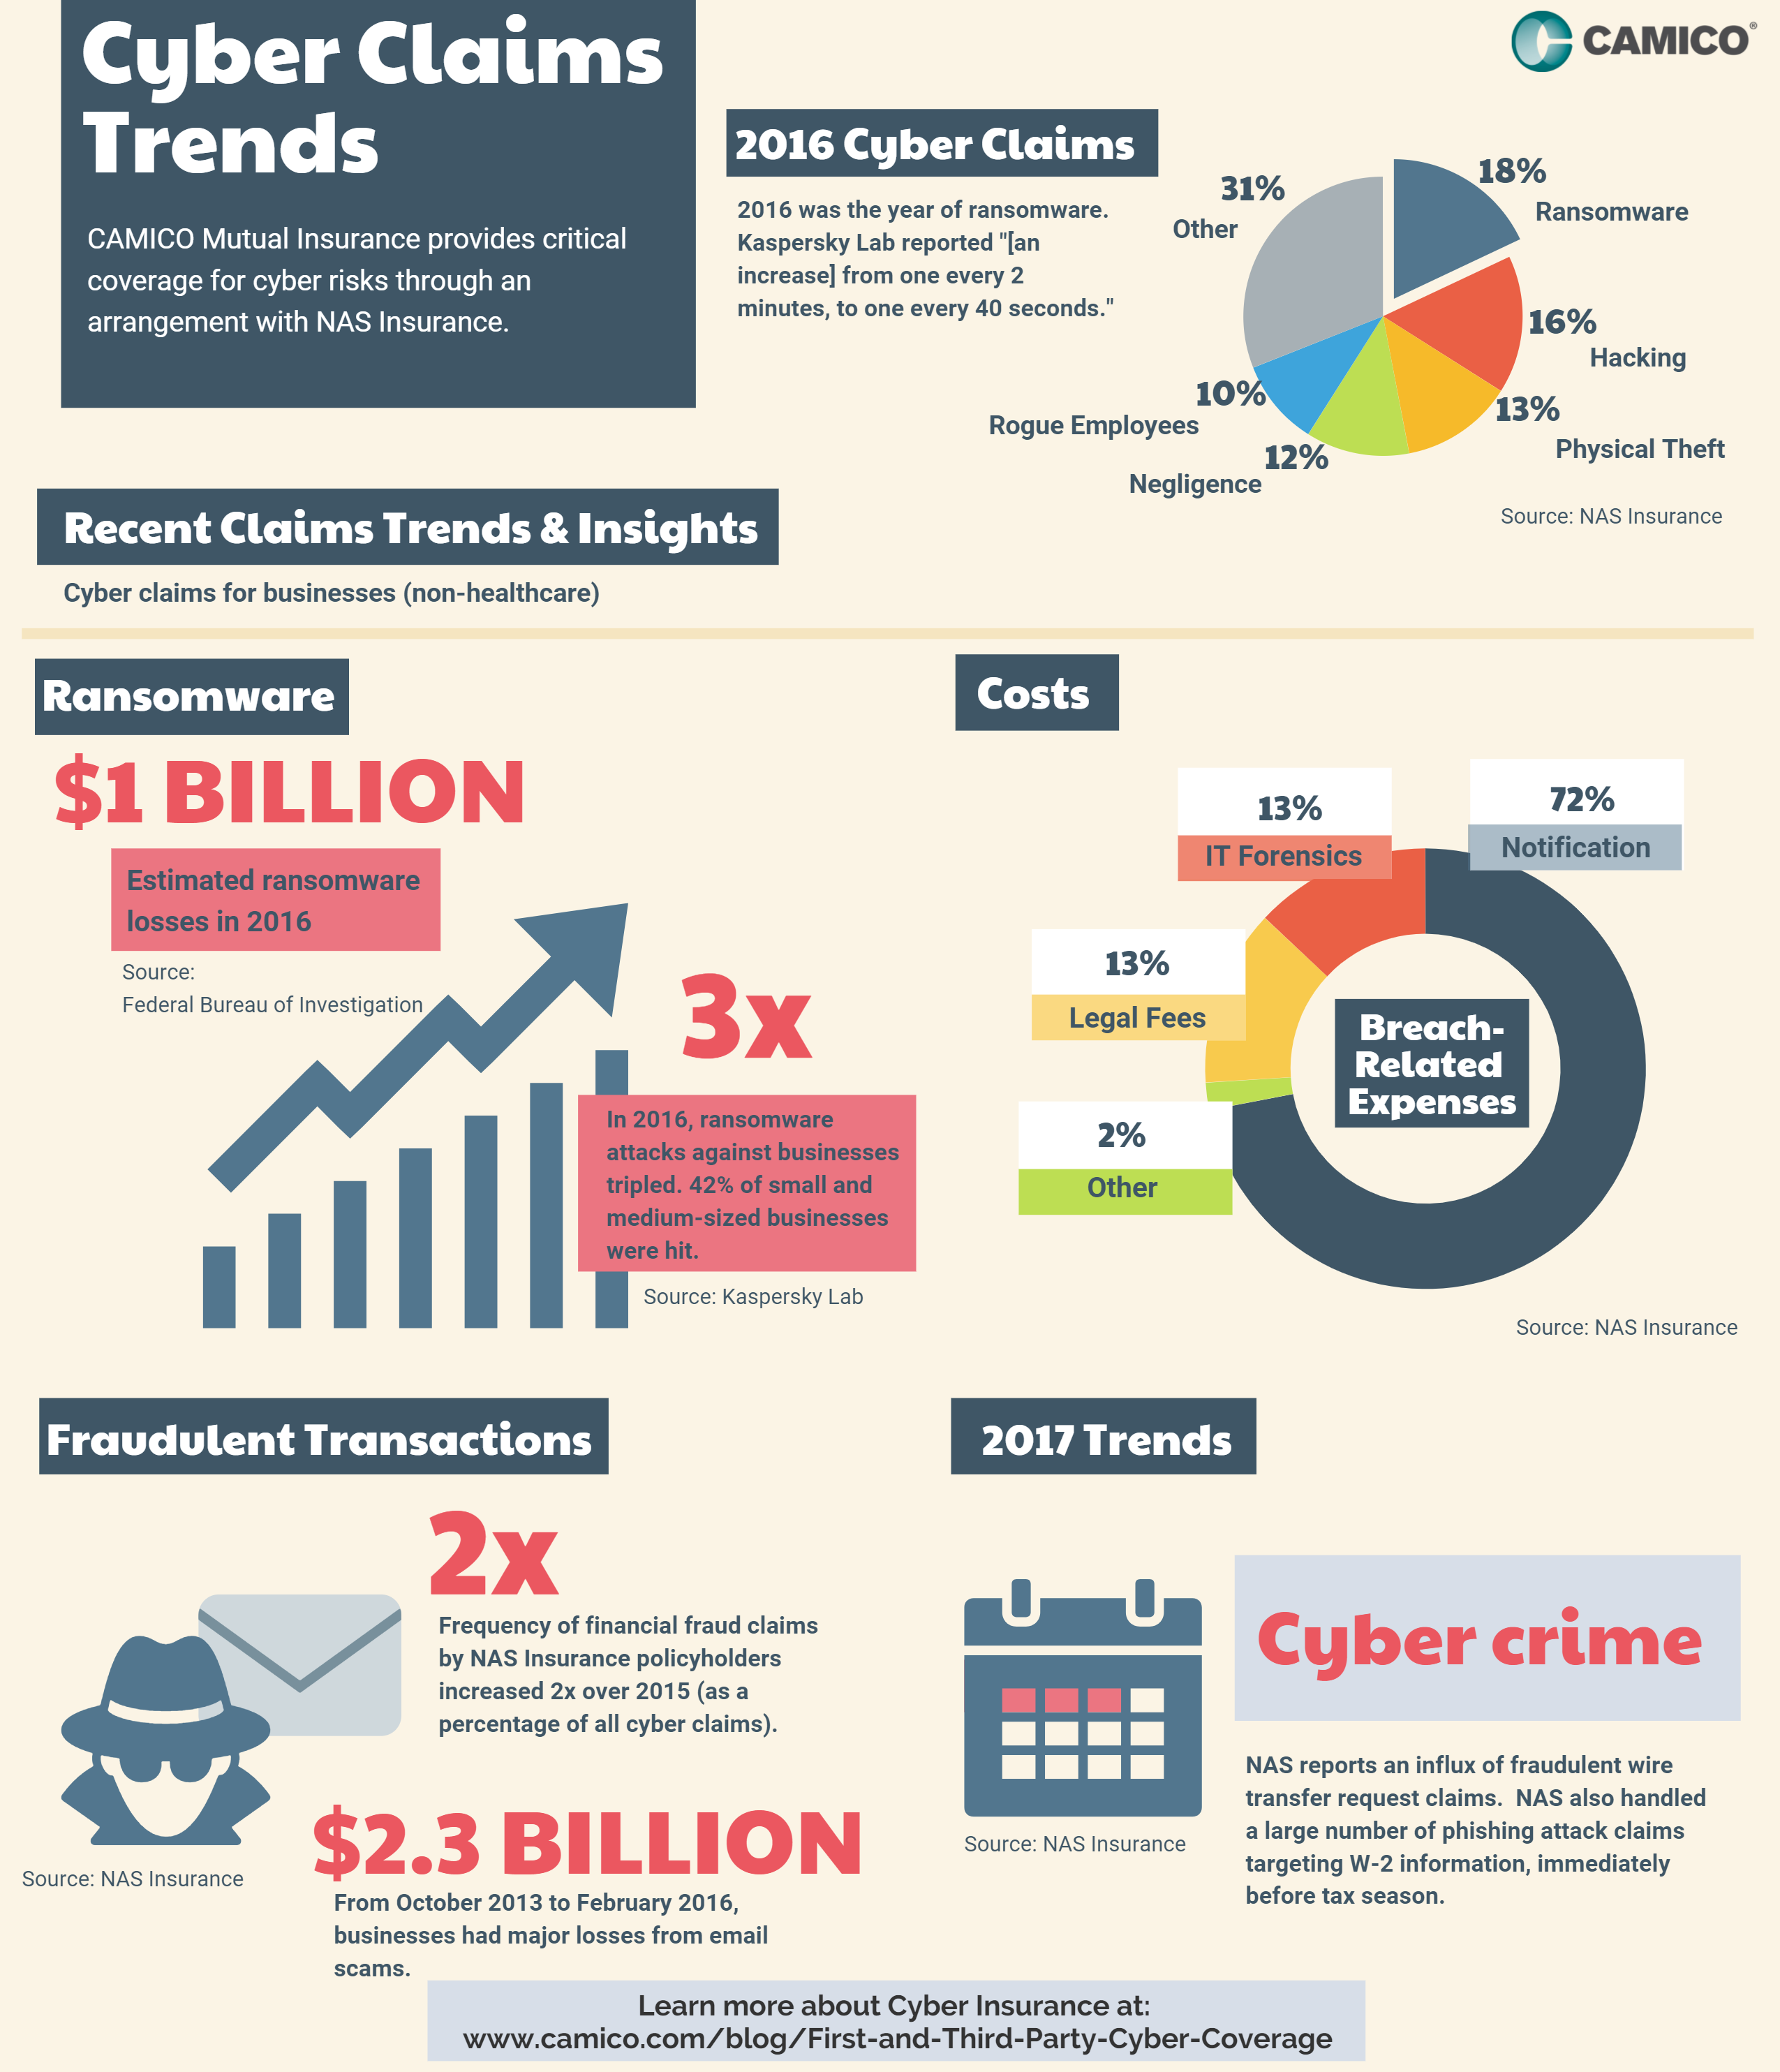 Cyber Claims Trends for 2016